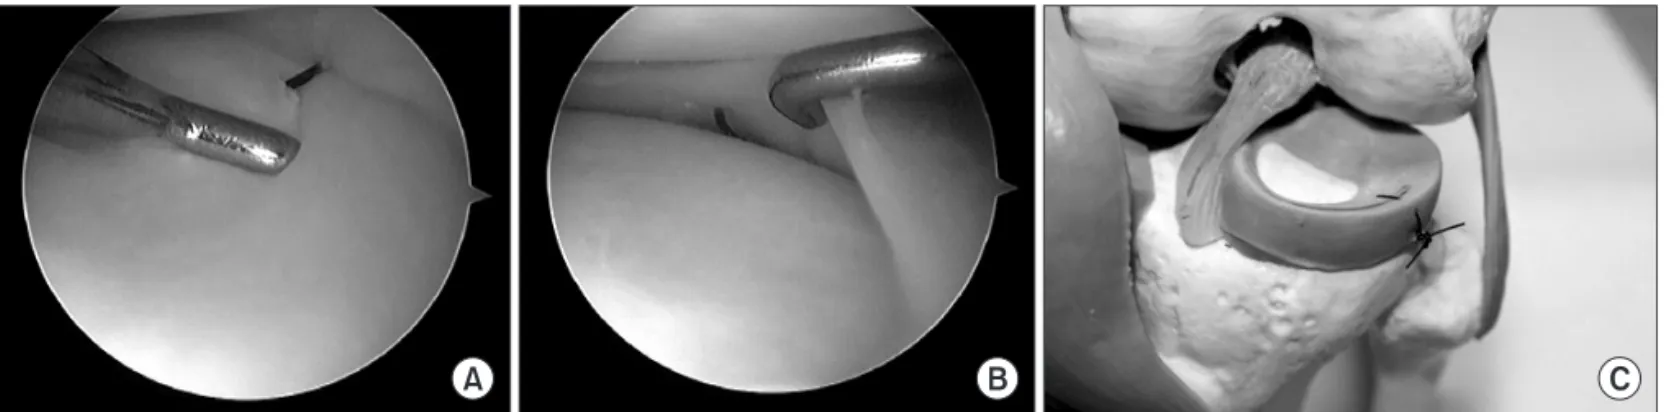 Fig. 5. (A, B) Arthroscopic views from the anterolateral portal show the suture is oriented in a vertical fashion